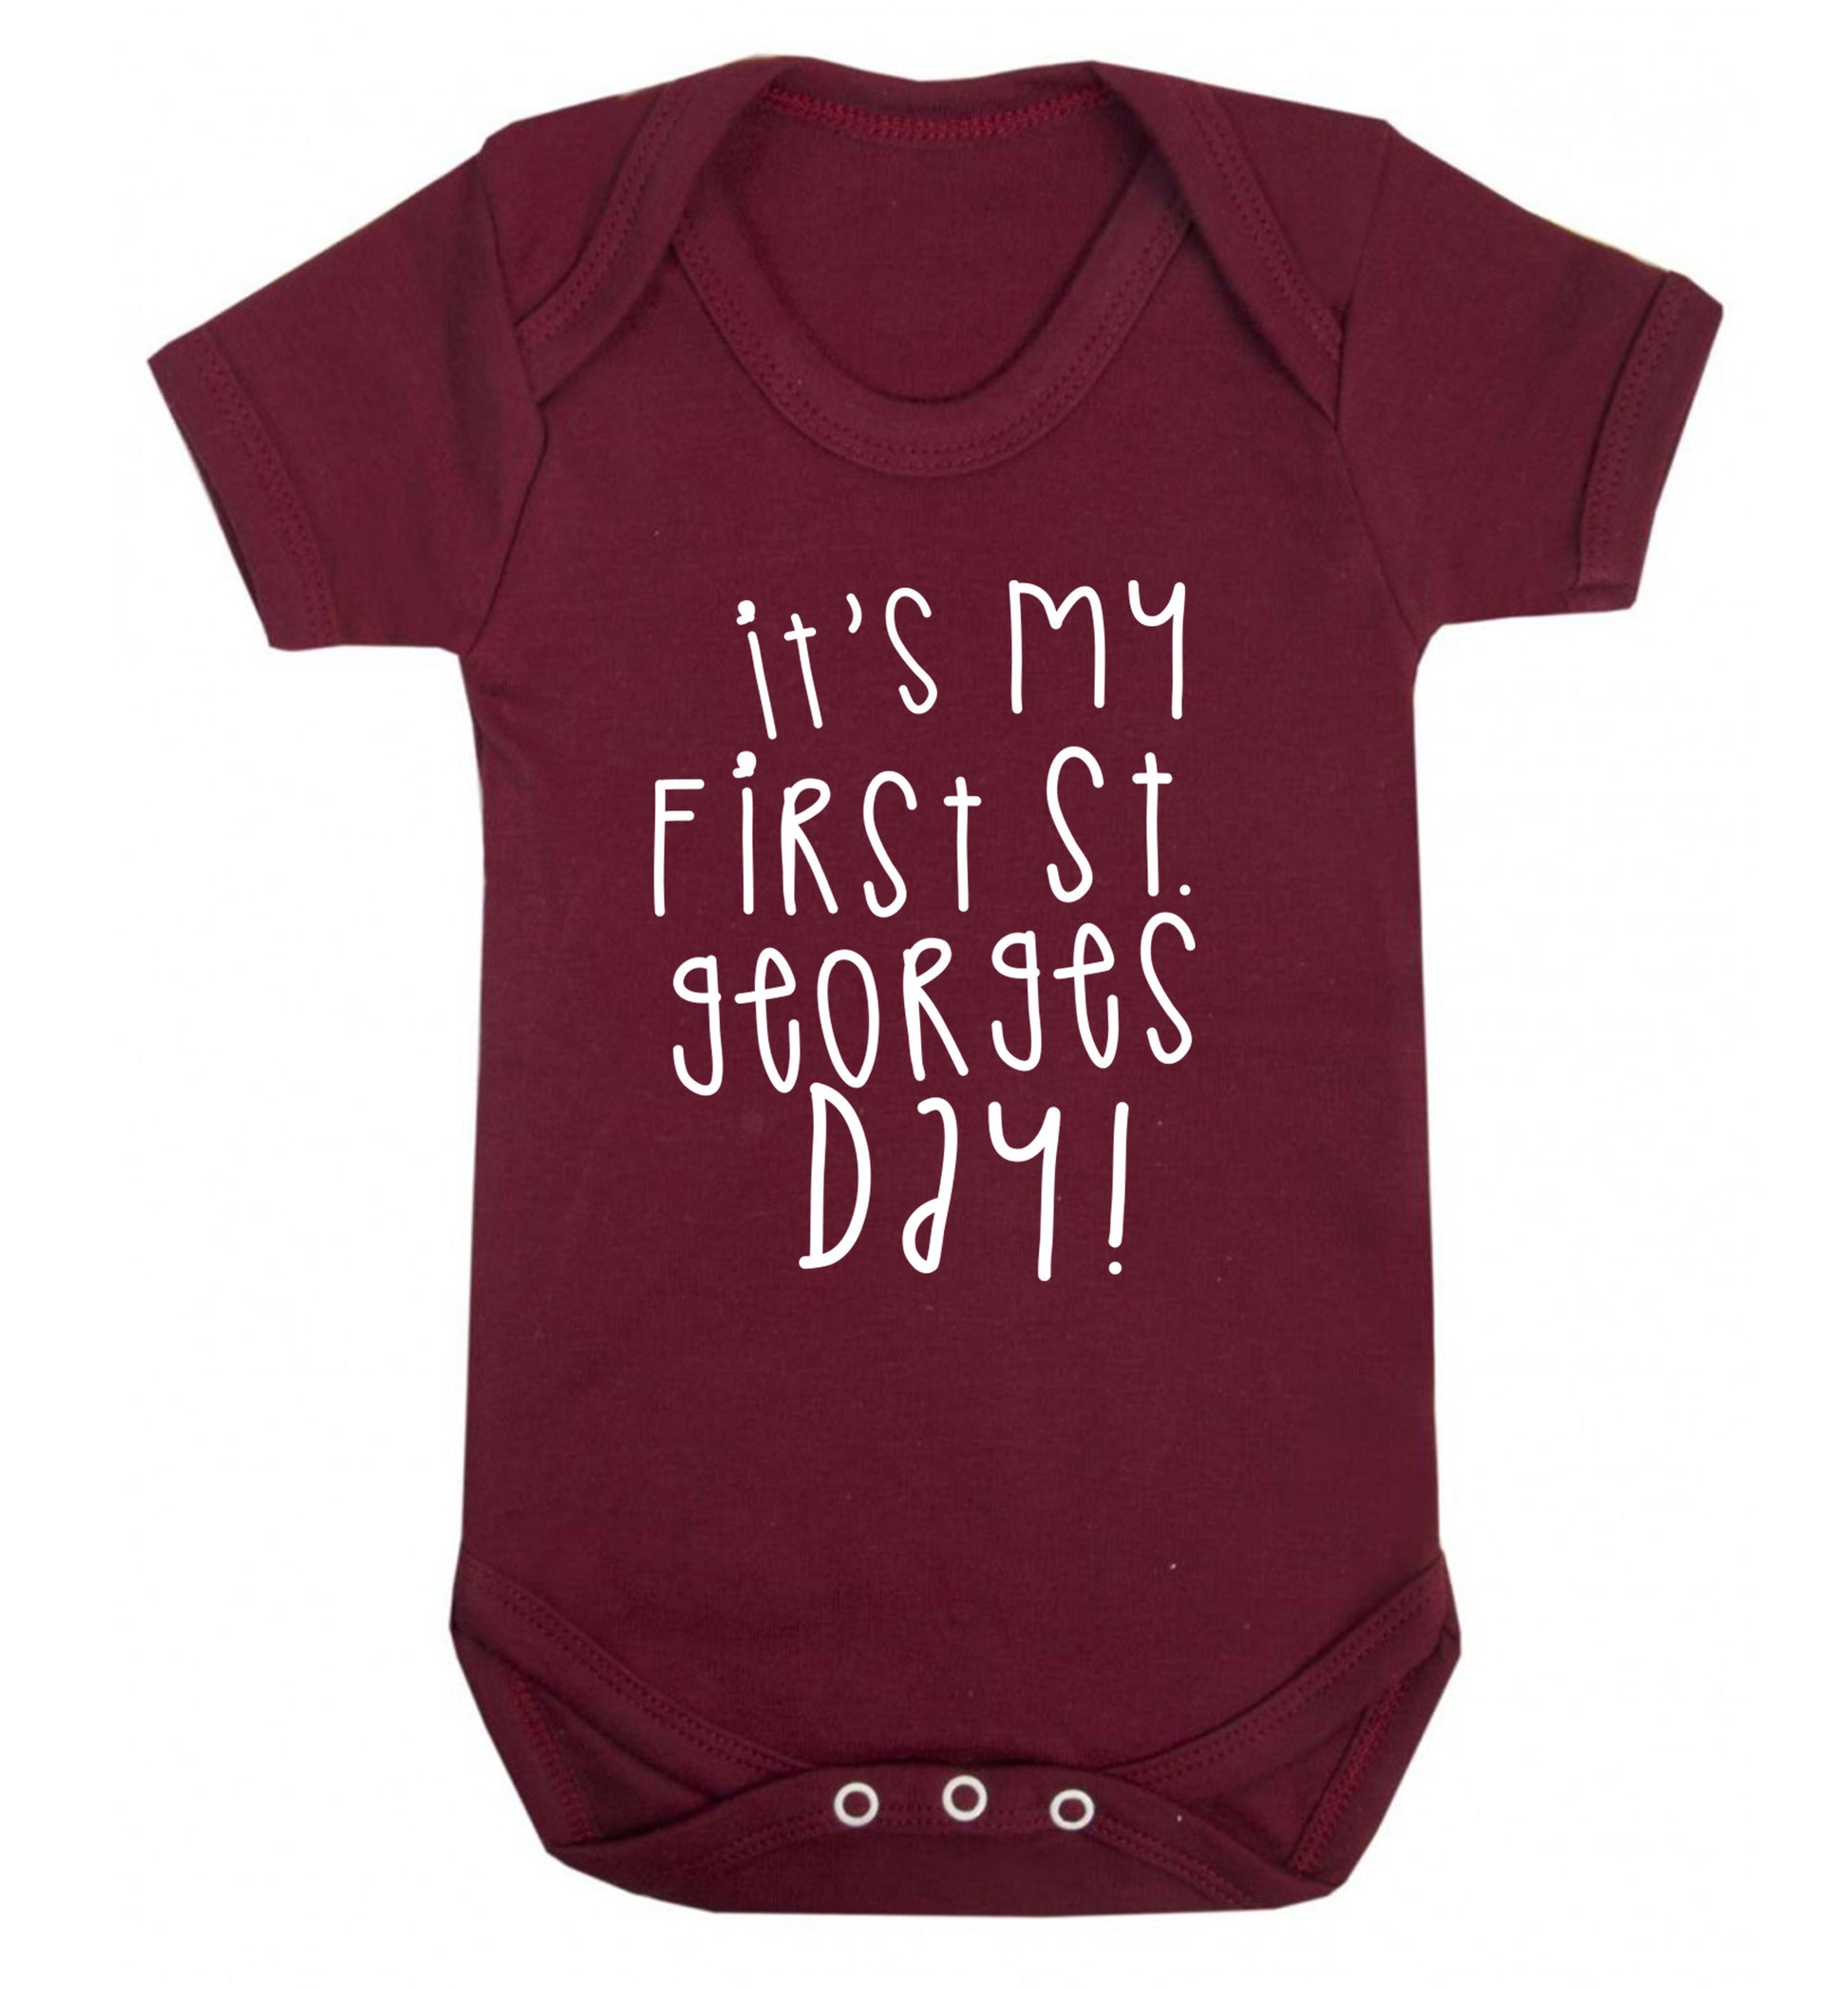 It's my first St Georges day Baby Vest maroon 18-24 months